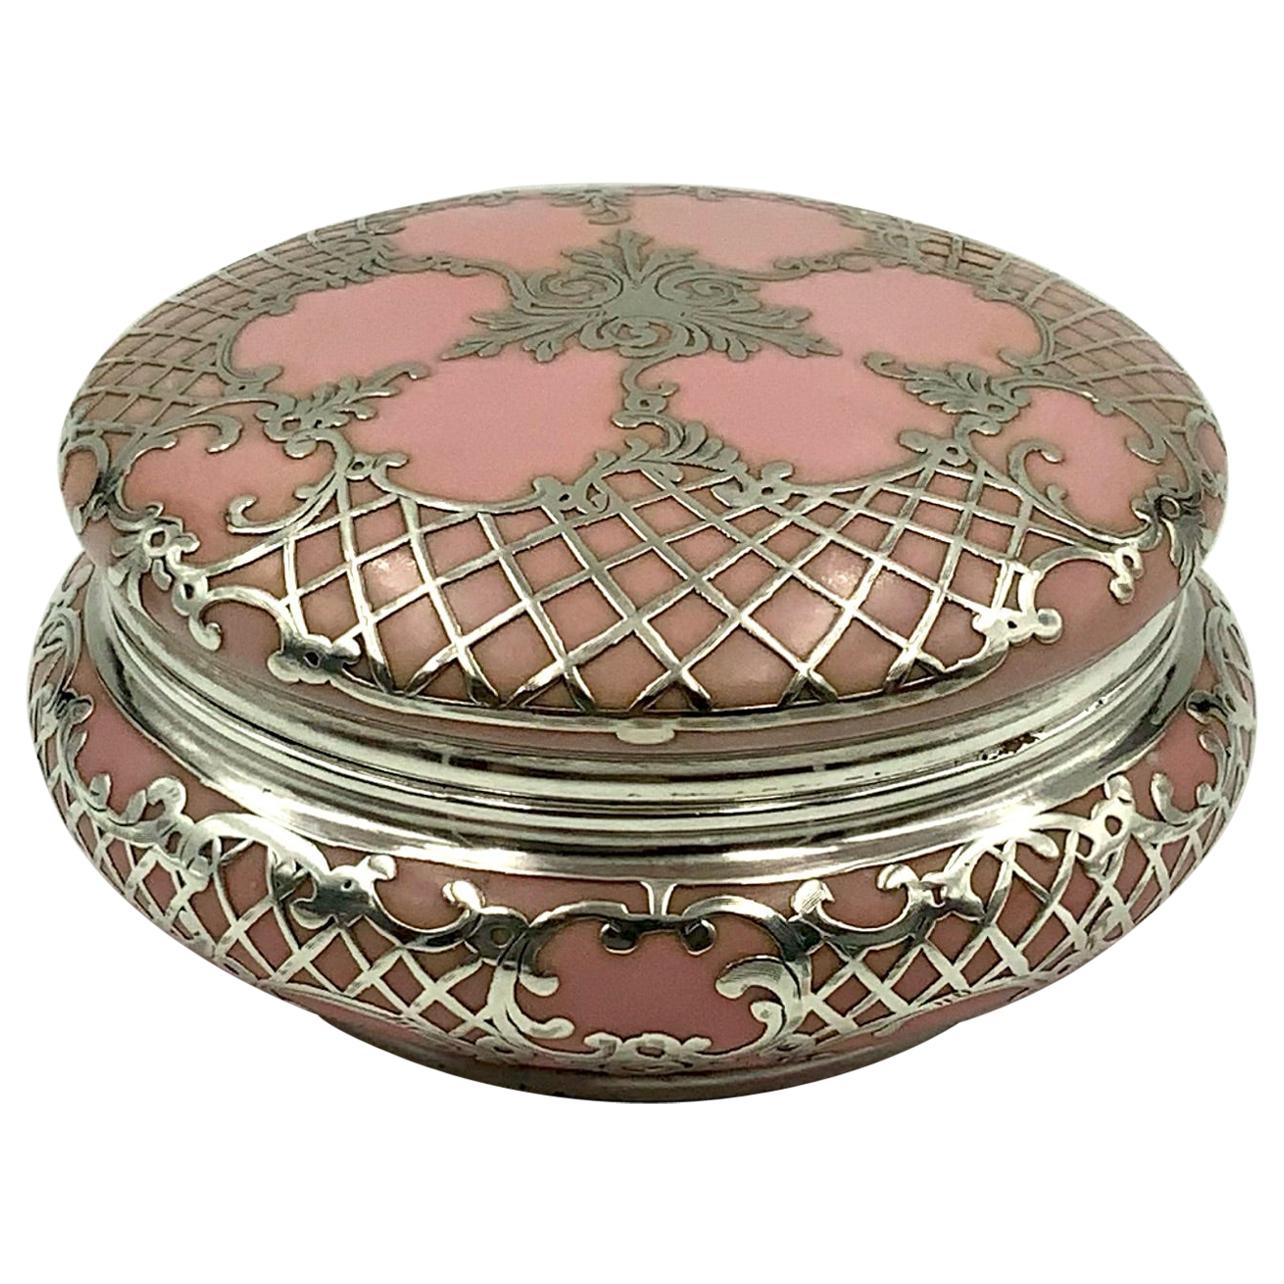 Gorgeous trinket box or powder jar featuring an ornate scroll and lattice design sterling silver overlay over a pretty pink porcelain. The mark on the bottom is not legible.